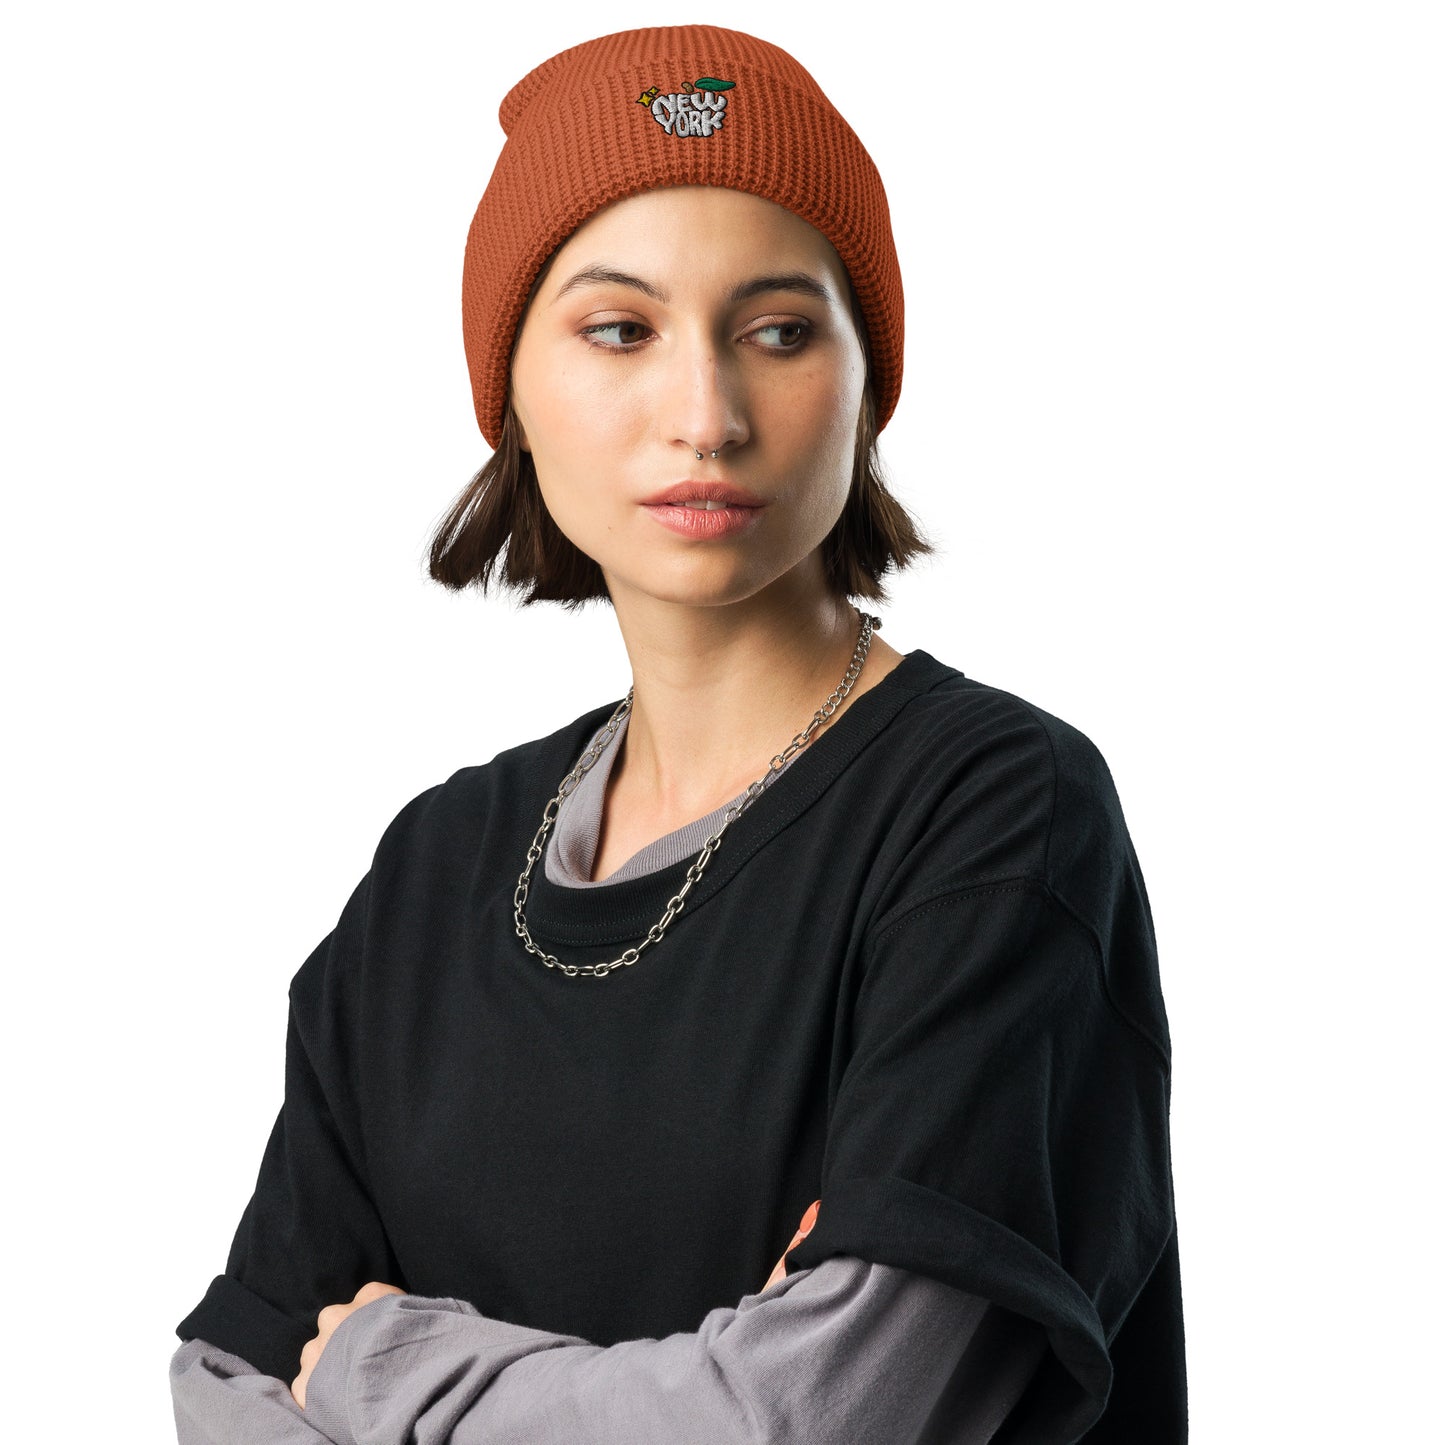 New York Apple Logo Embroidered Rust Orange Waffle Beanie Hat Scattered Streetwear